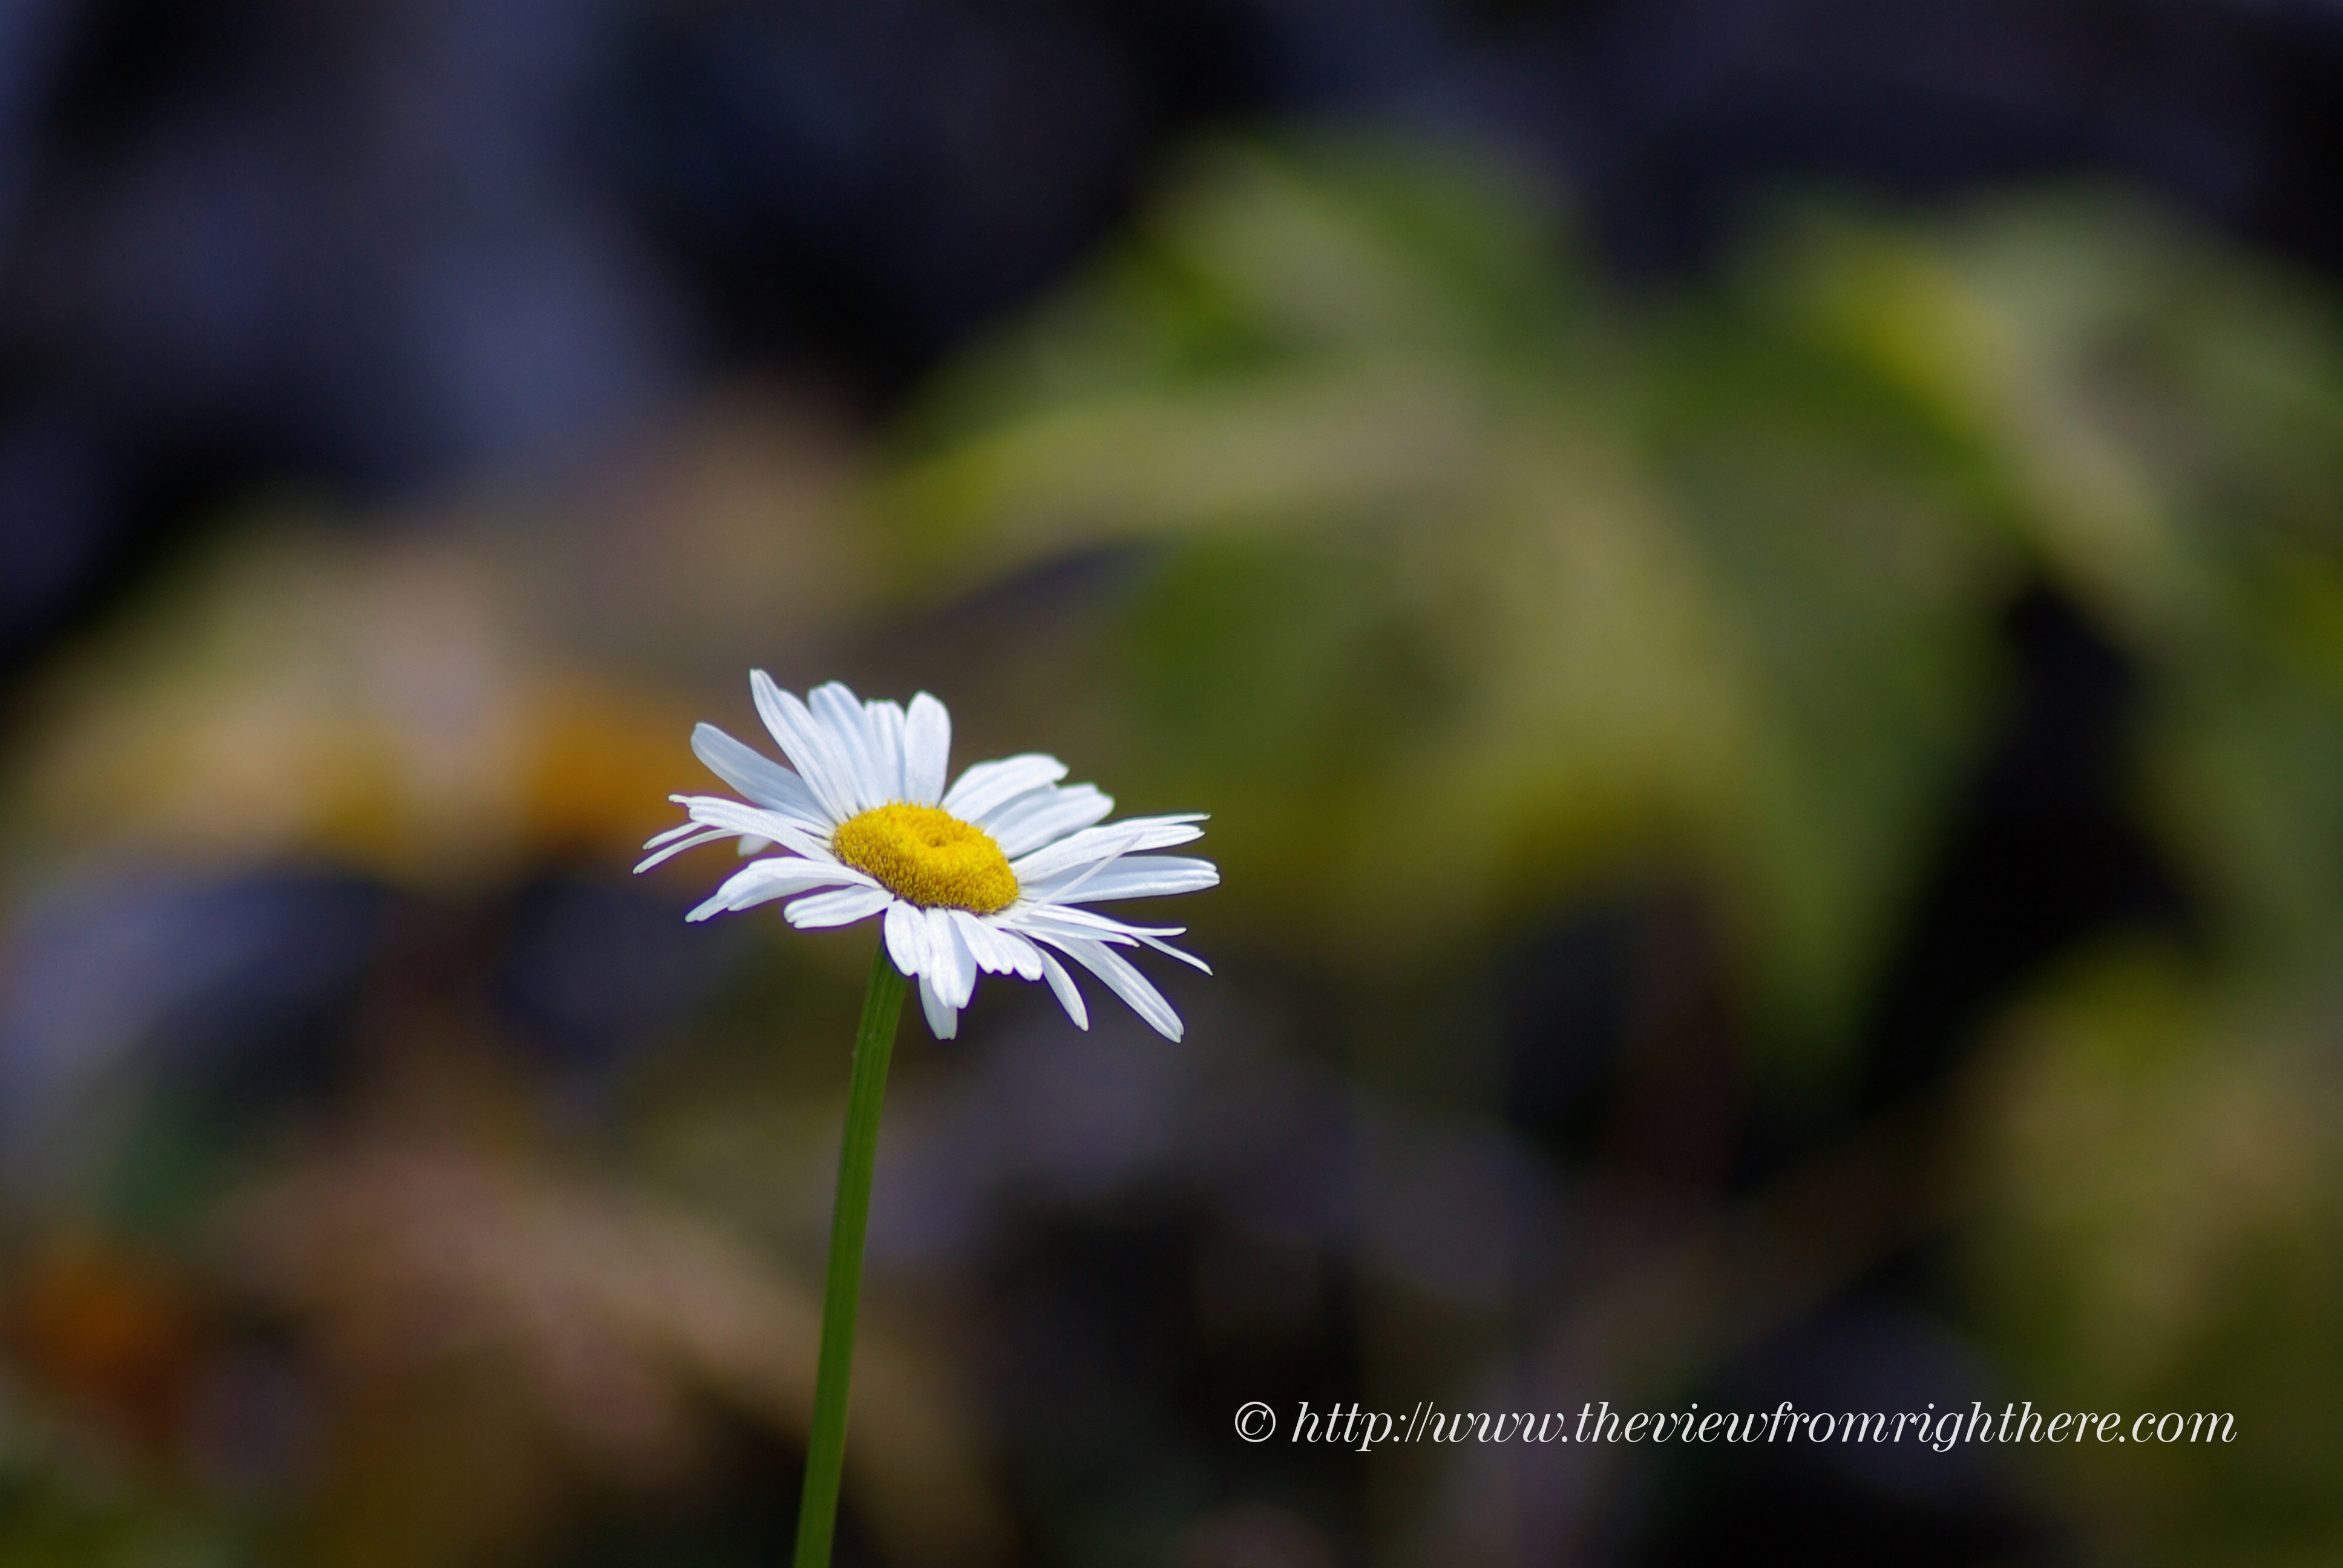 Simple Elegance, the Daisy – ‘Eye of the Day’